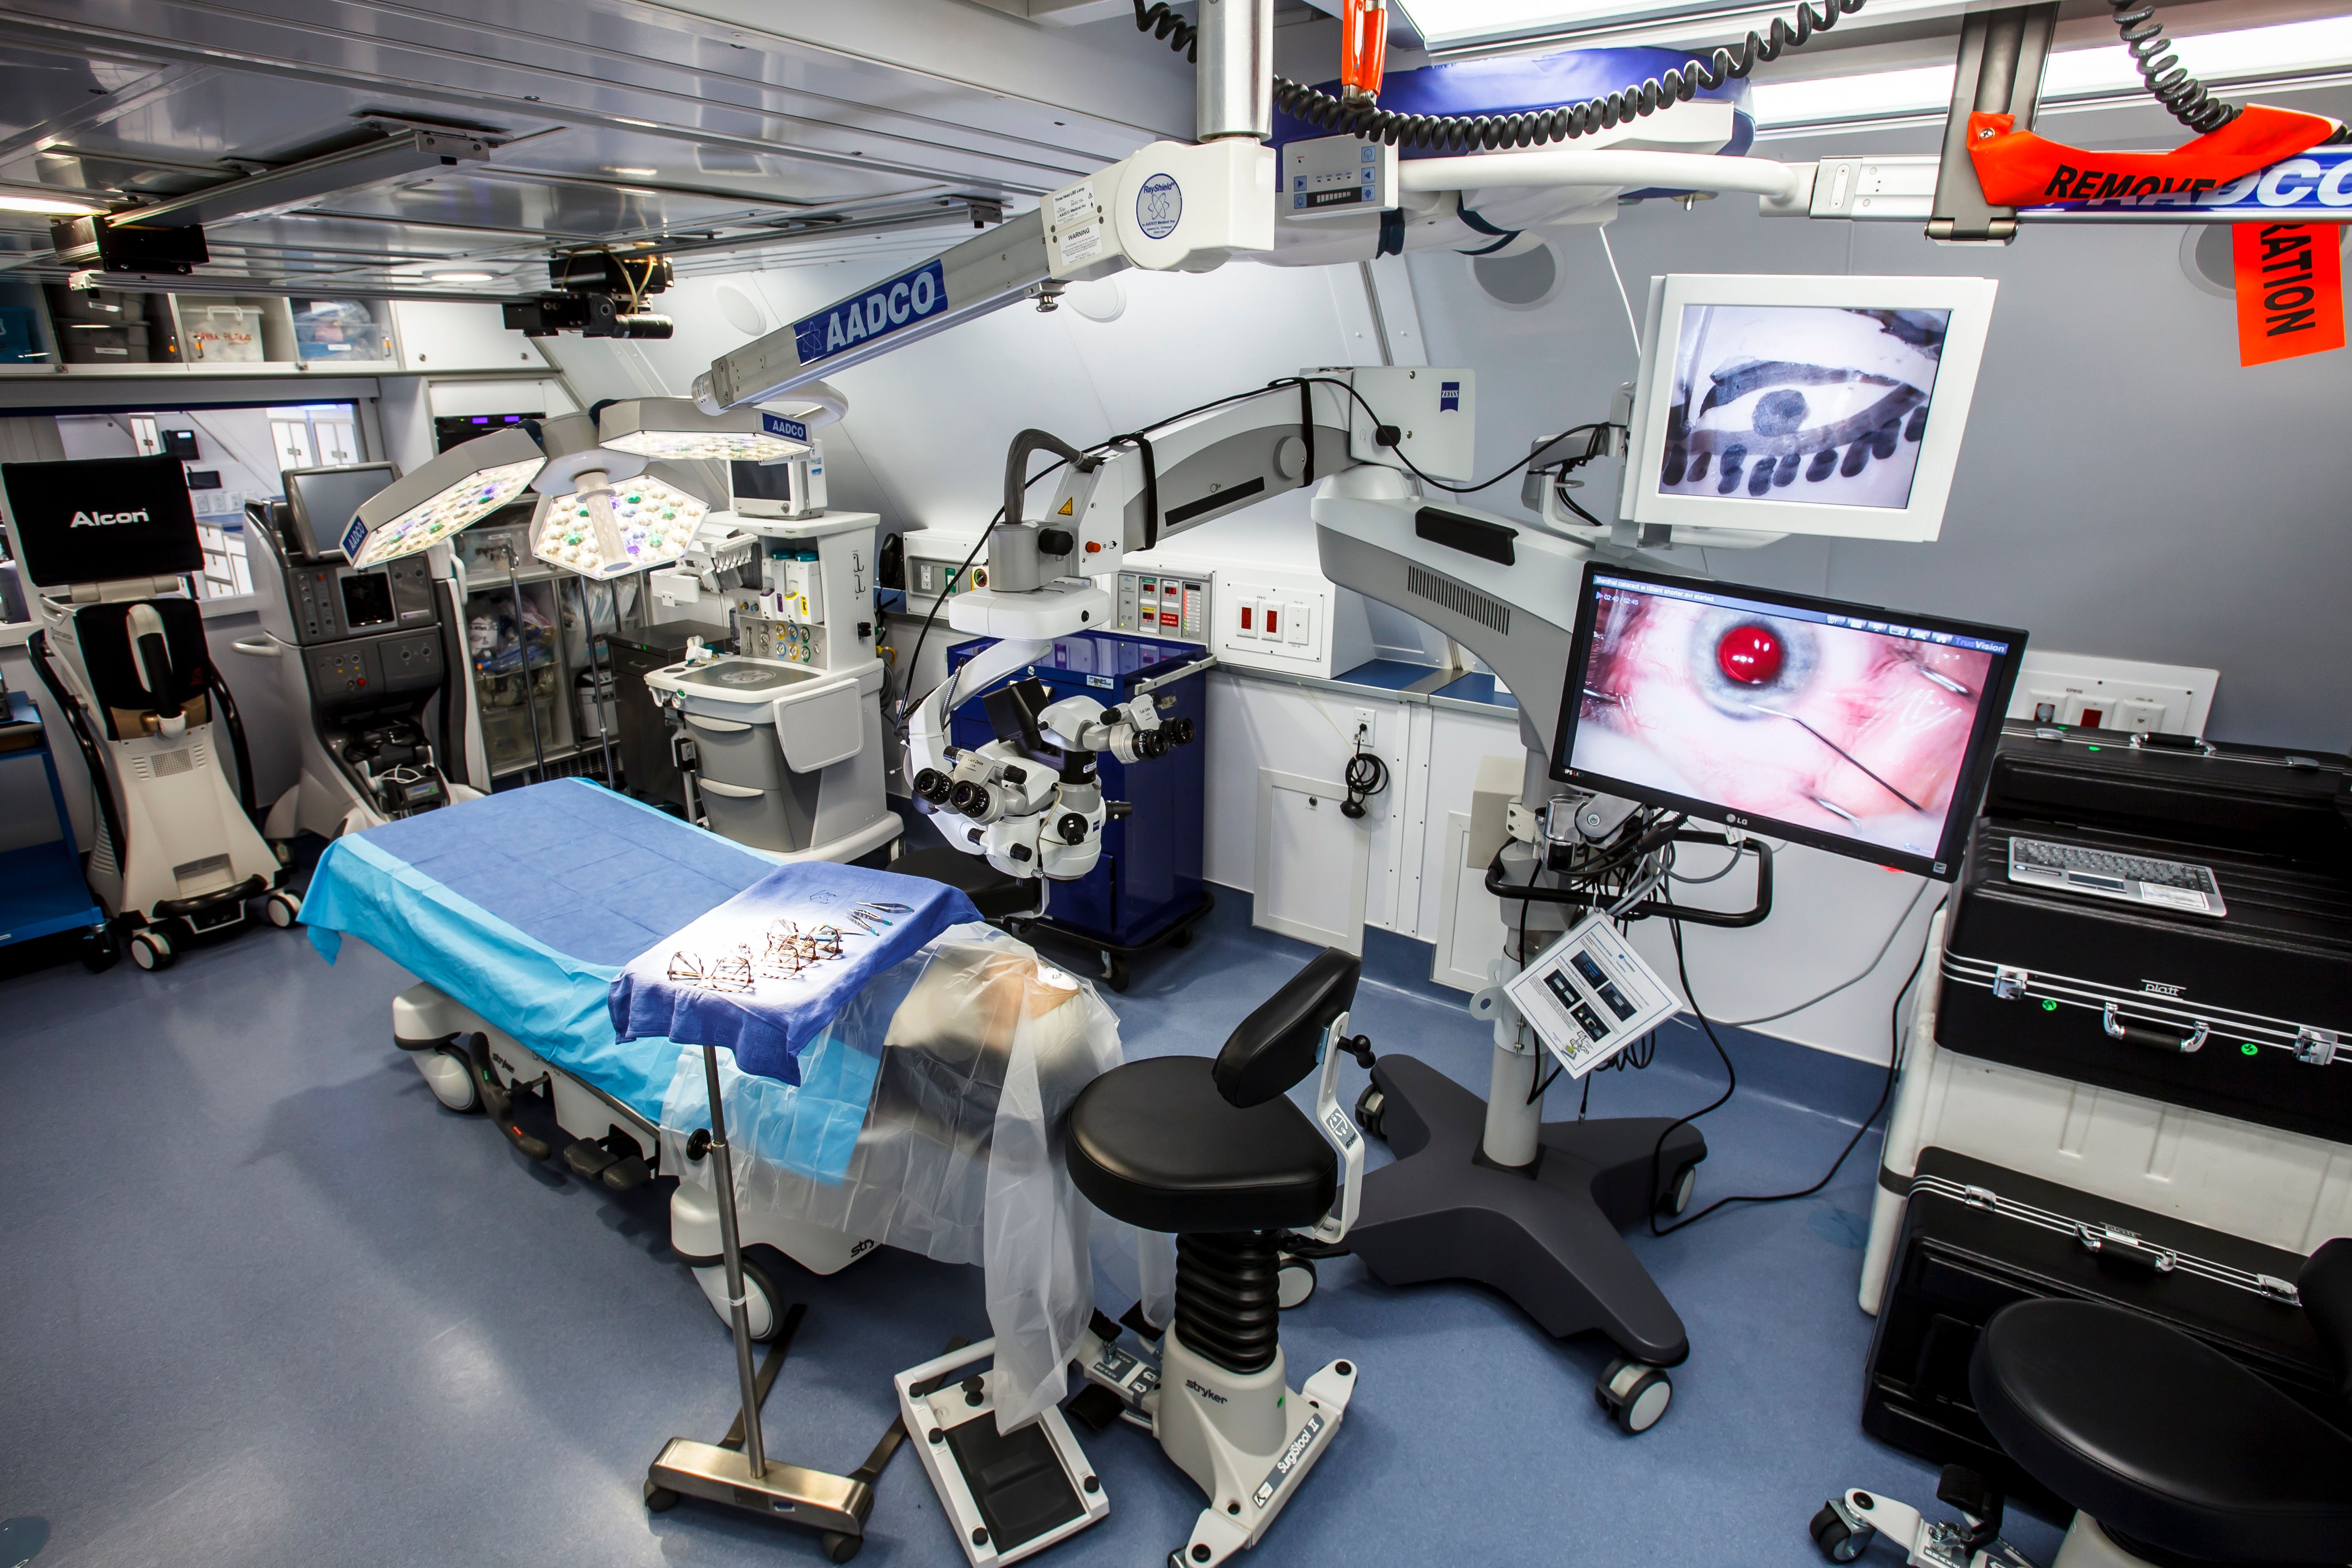 Surgery that takes place in the operating room of the Flying Eye Hospital is broadcast live in the plane's classroom and through Cybersight, Orbis's telemedicine platform.